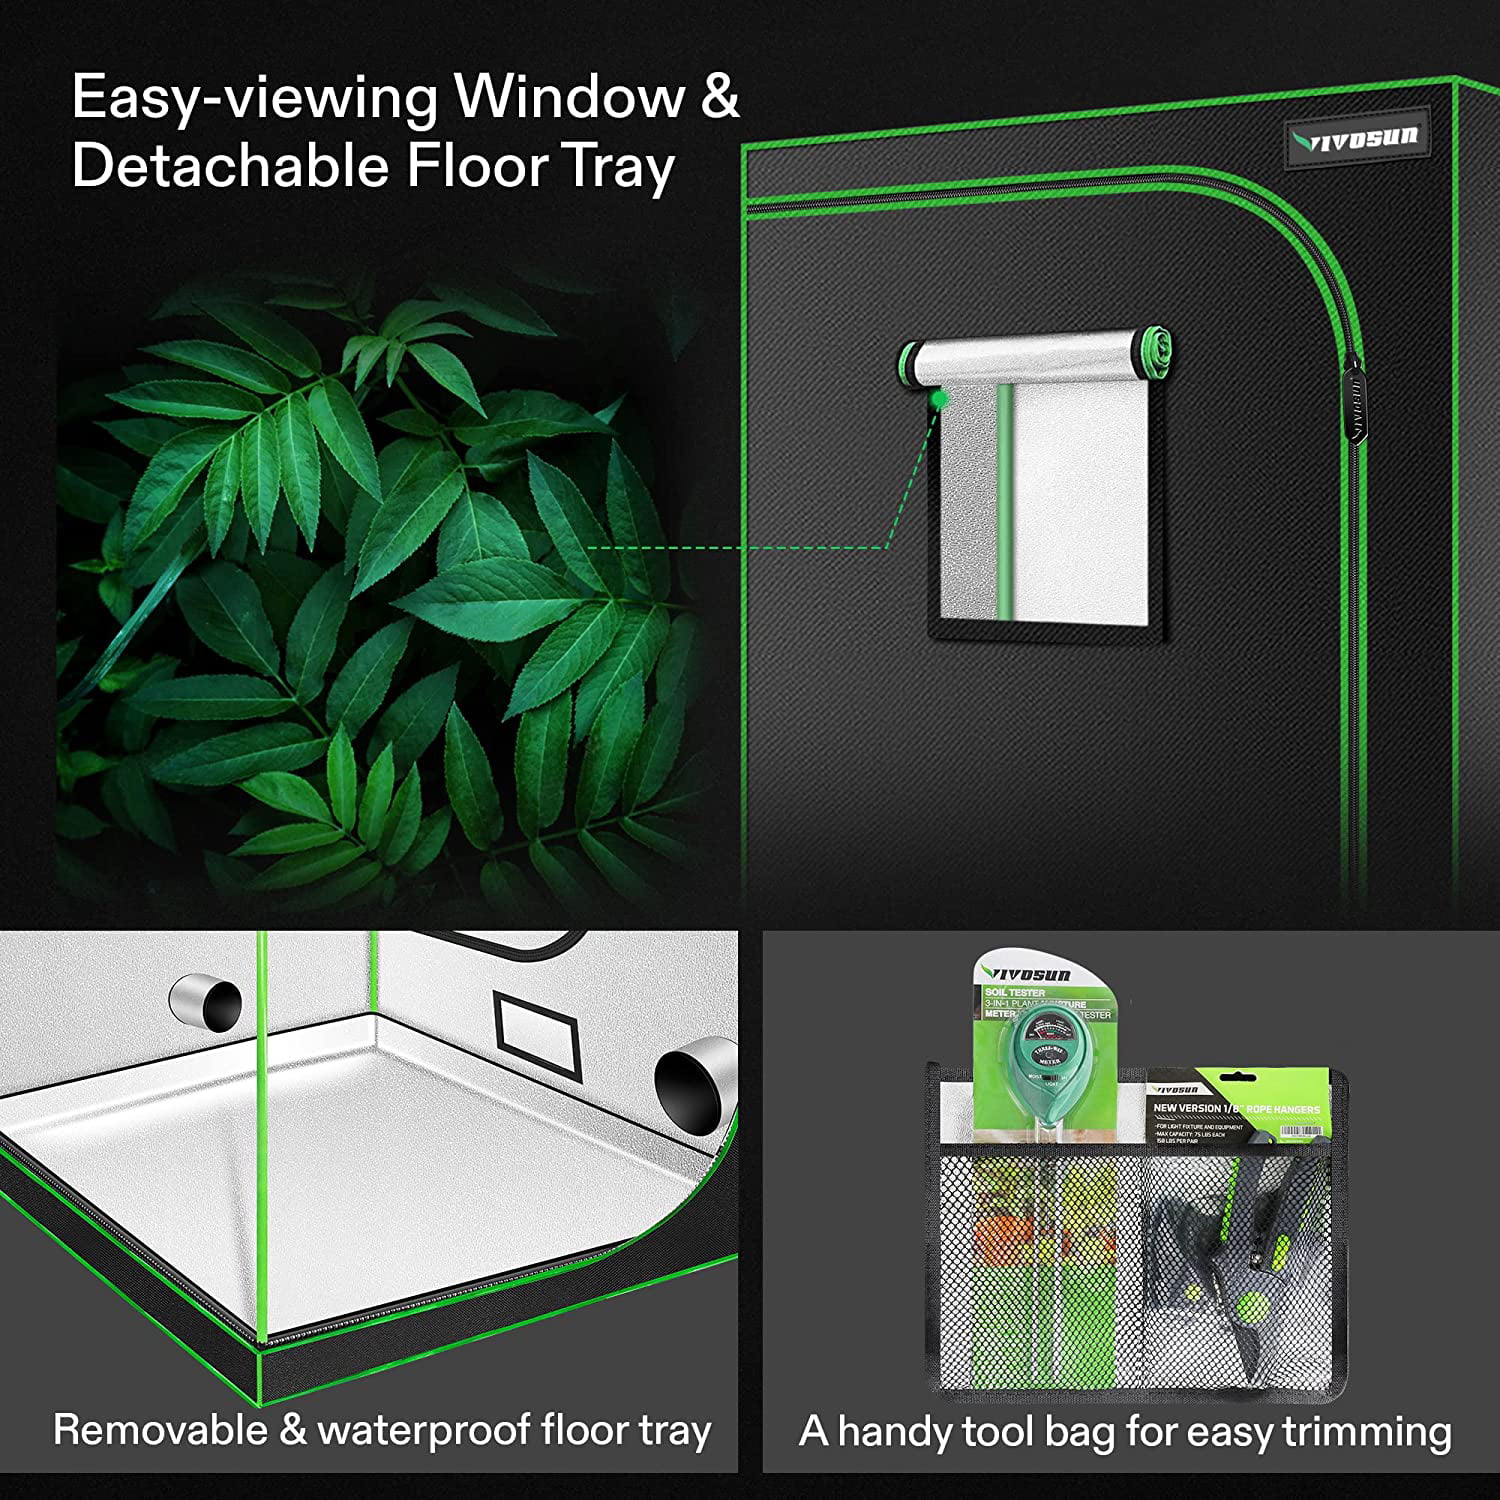 VIVOSUN 48inch x 24inch x 60inch Mylar Hydroponic Grow Tent with Observation Window and Floor Tray for sale online 